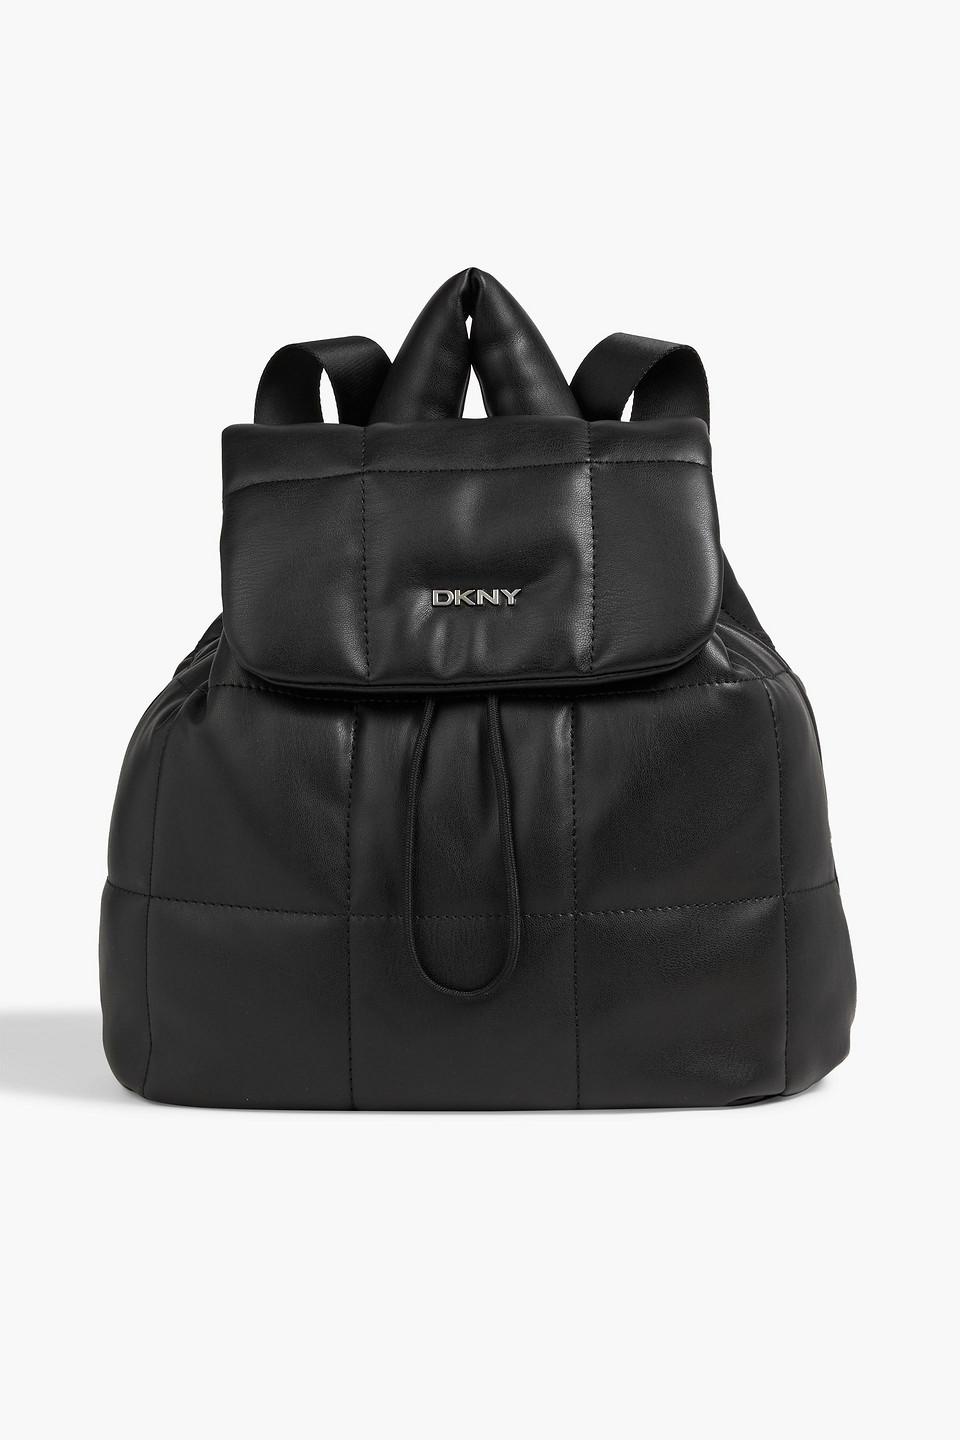 DKNY Poppy Quilted Faux Leather Backpack in Black | Lyst